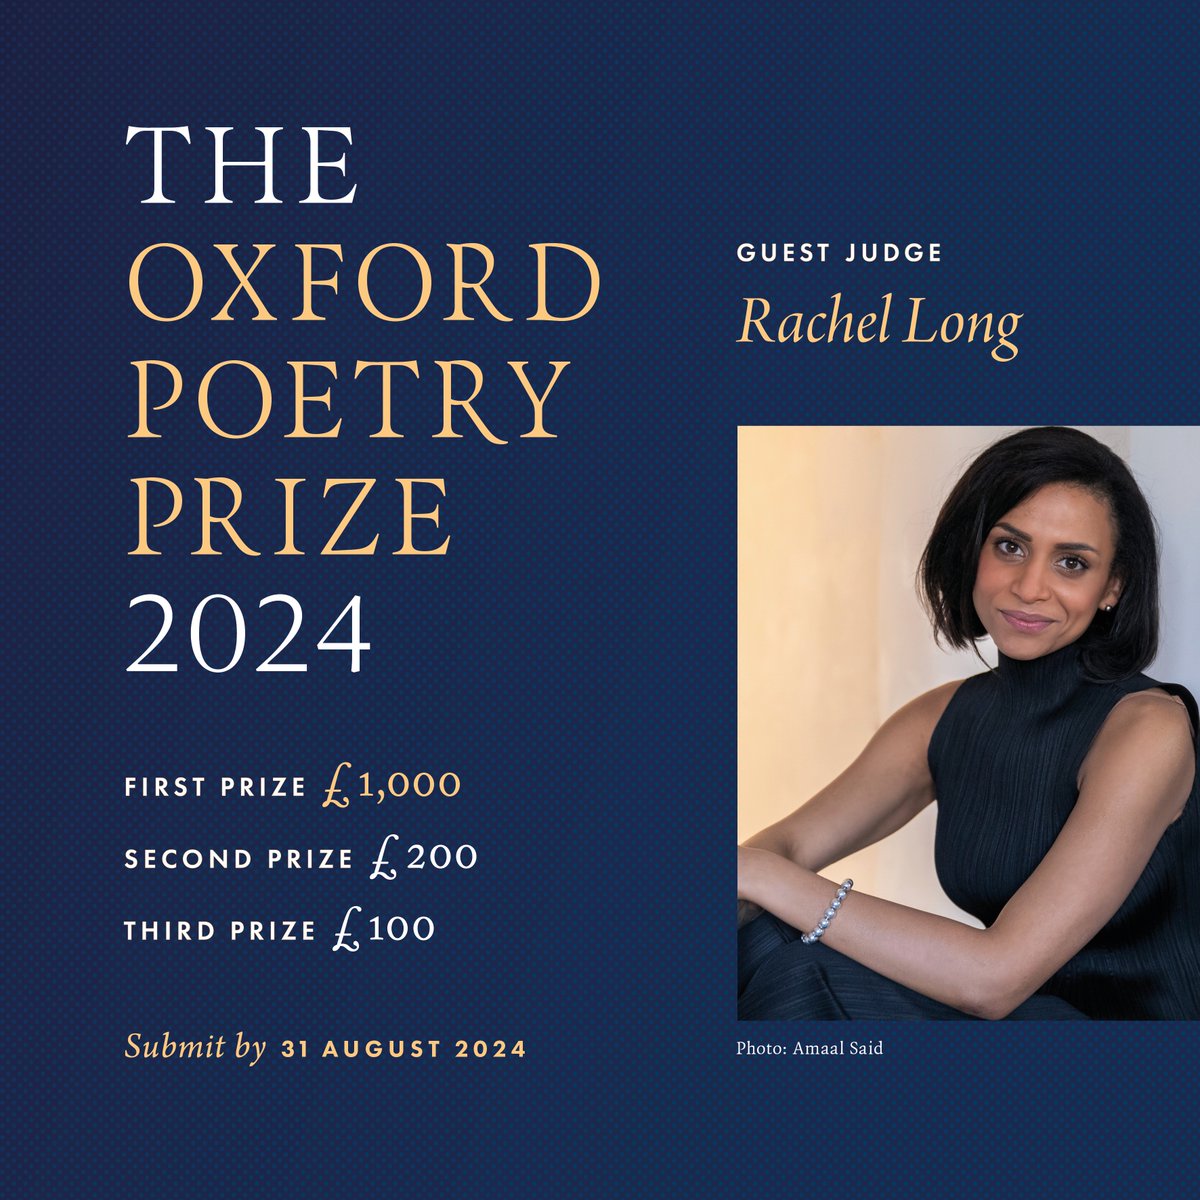 The 2024 Oxford Poetry Prize is now open for entries! oxfordpoetry.com/prize.html